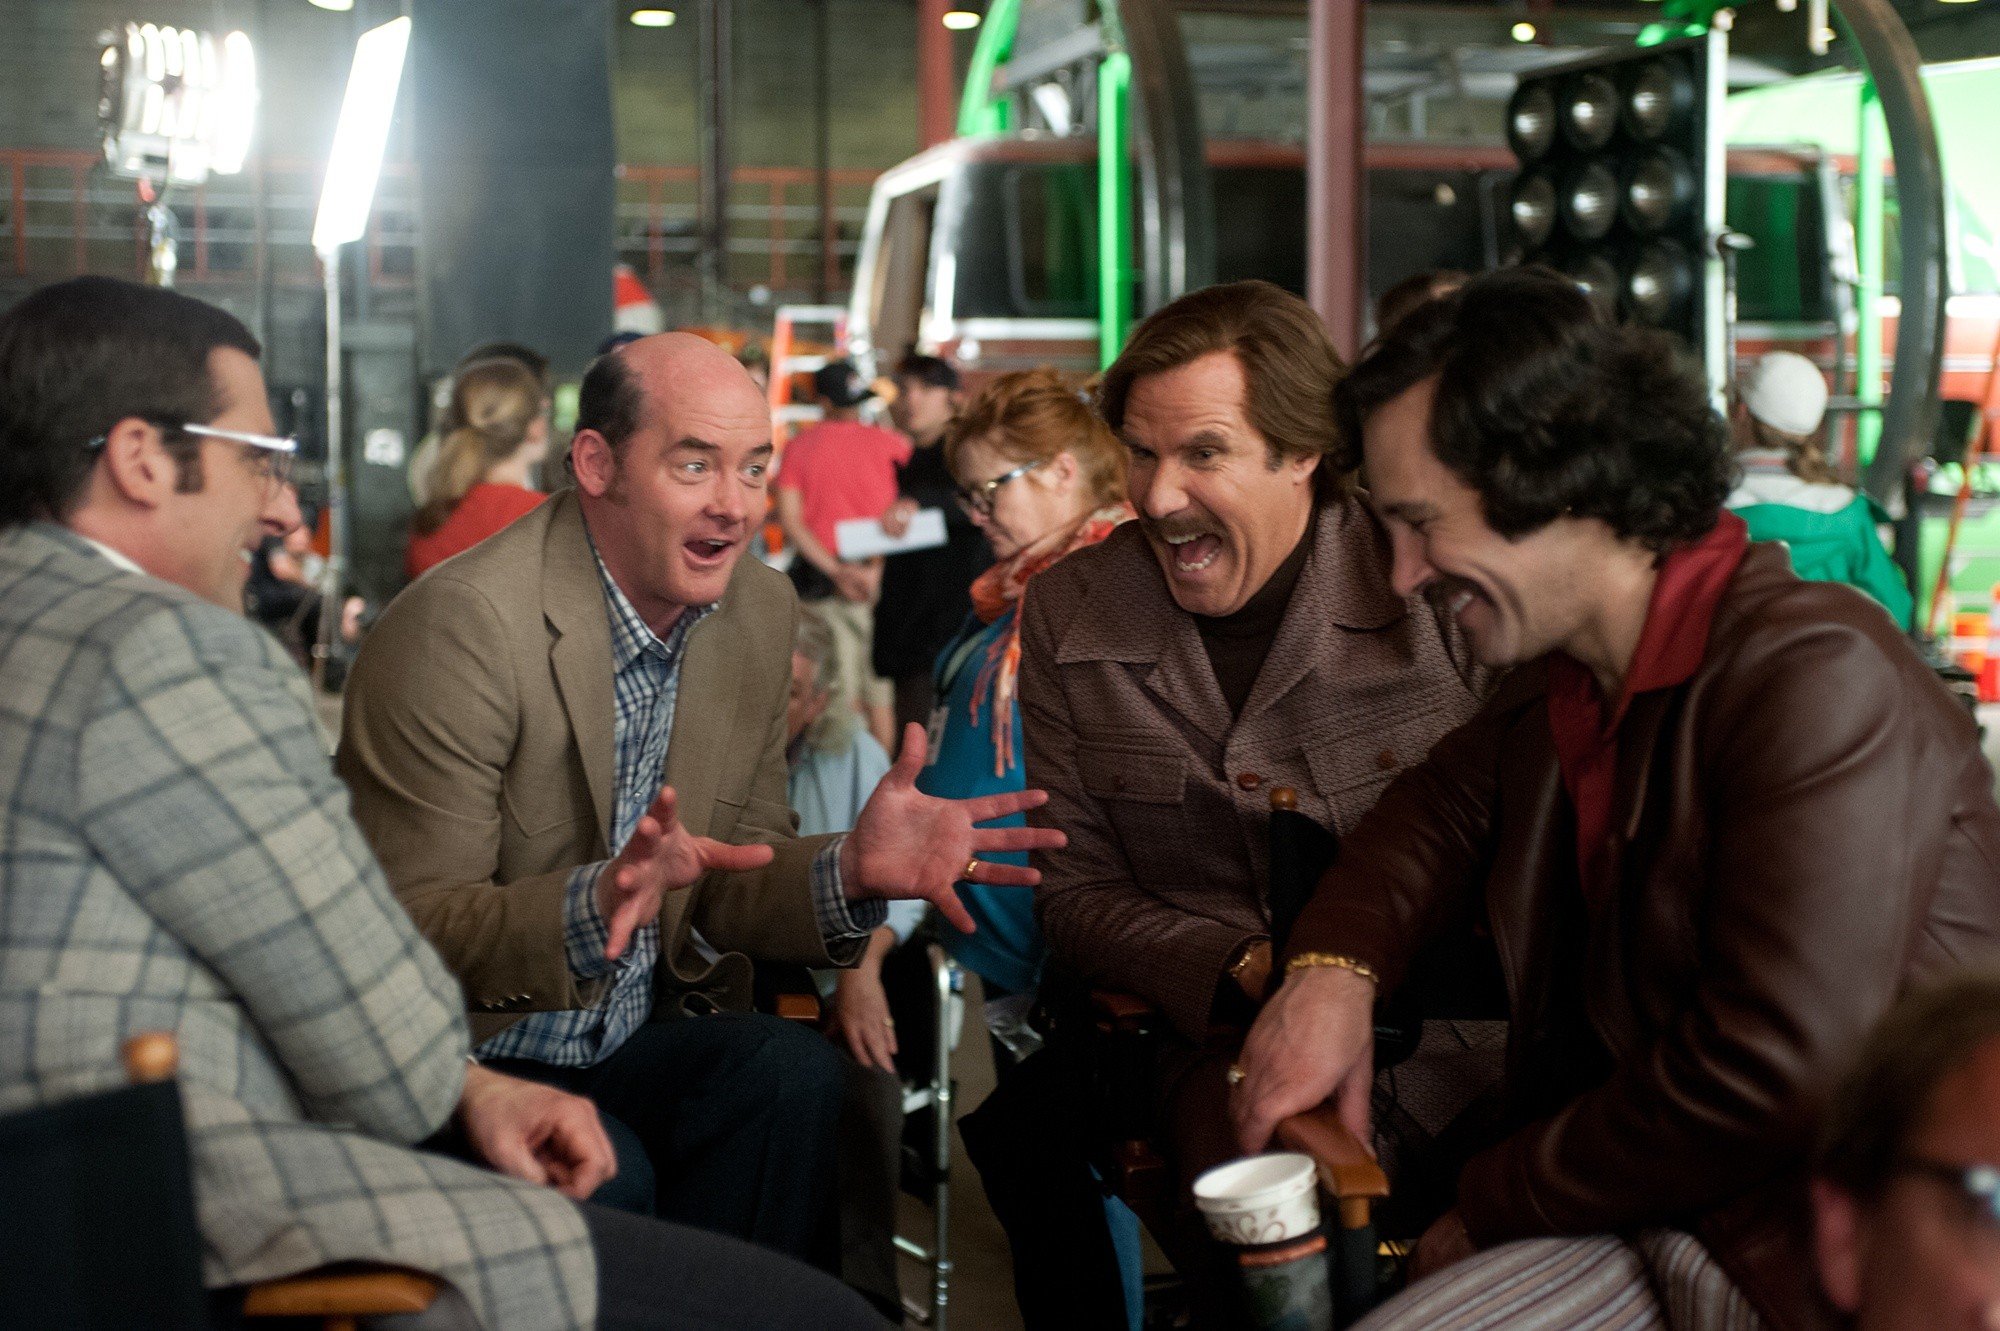 Steve Carell, David Koechner, Will Ferrell and Paul Rudd in Paramount Pictures' Anchorman: The Legend Continues (2013)